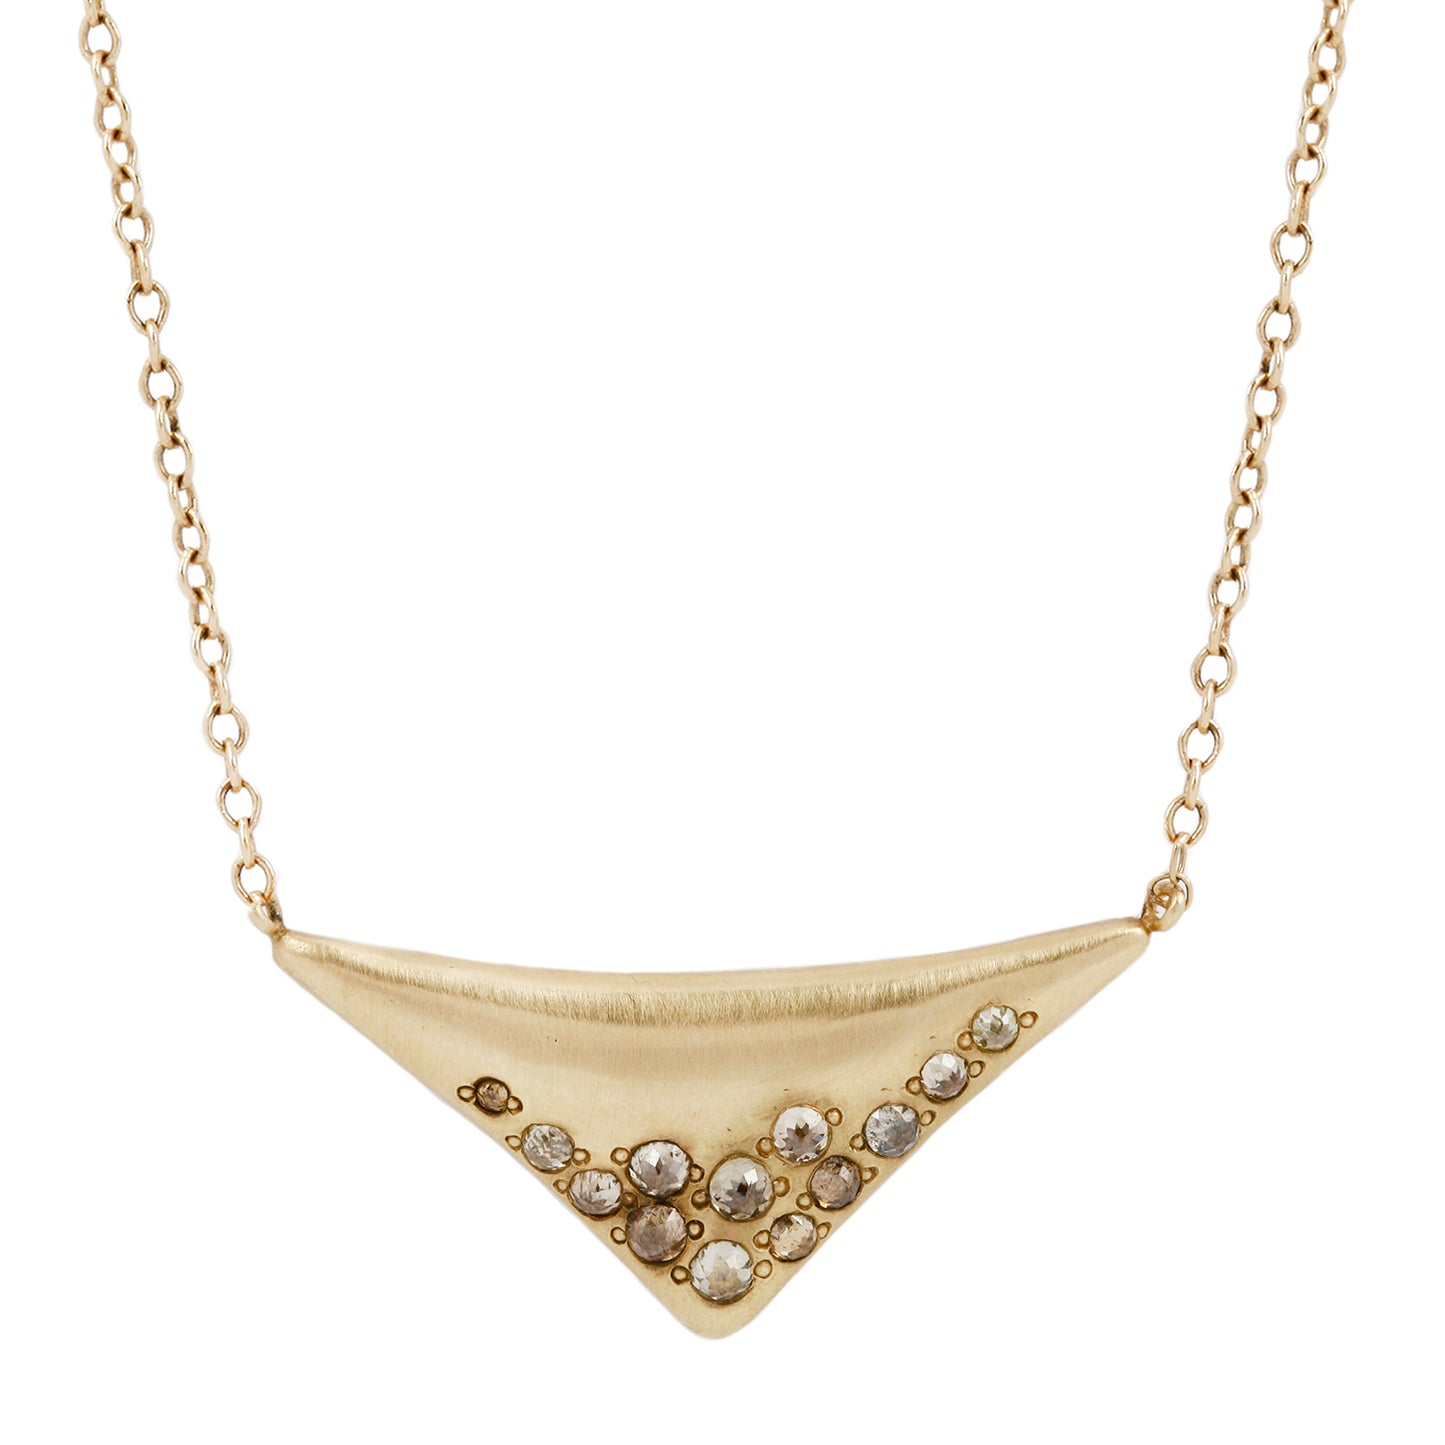 Ombre Triangle Necklace